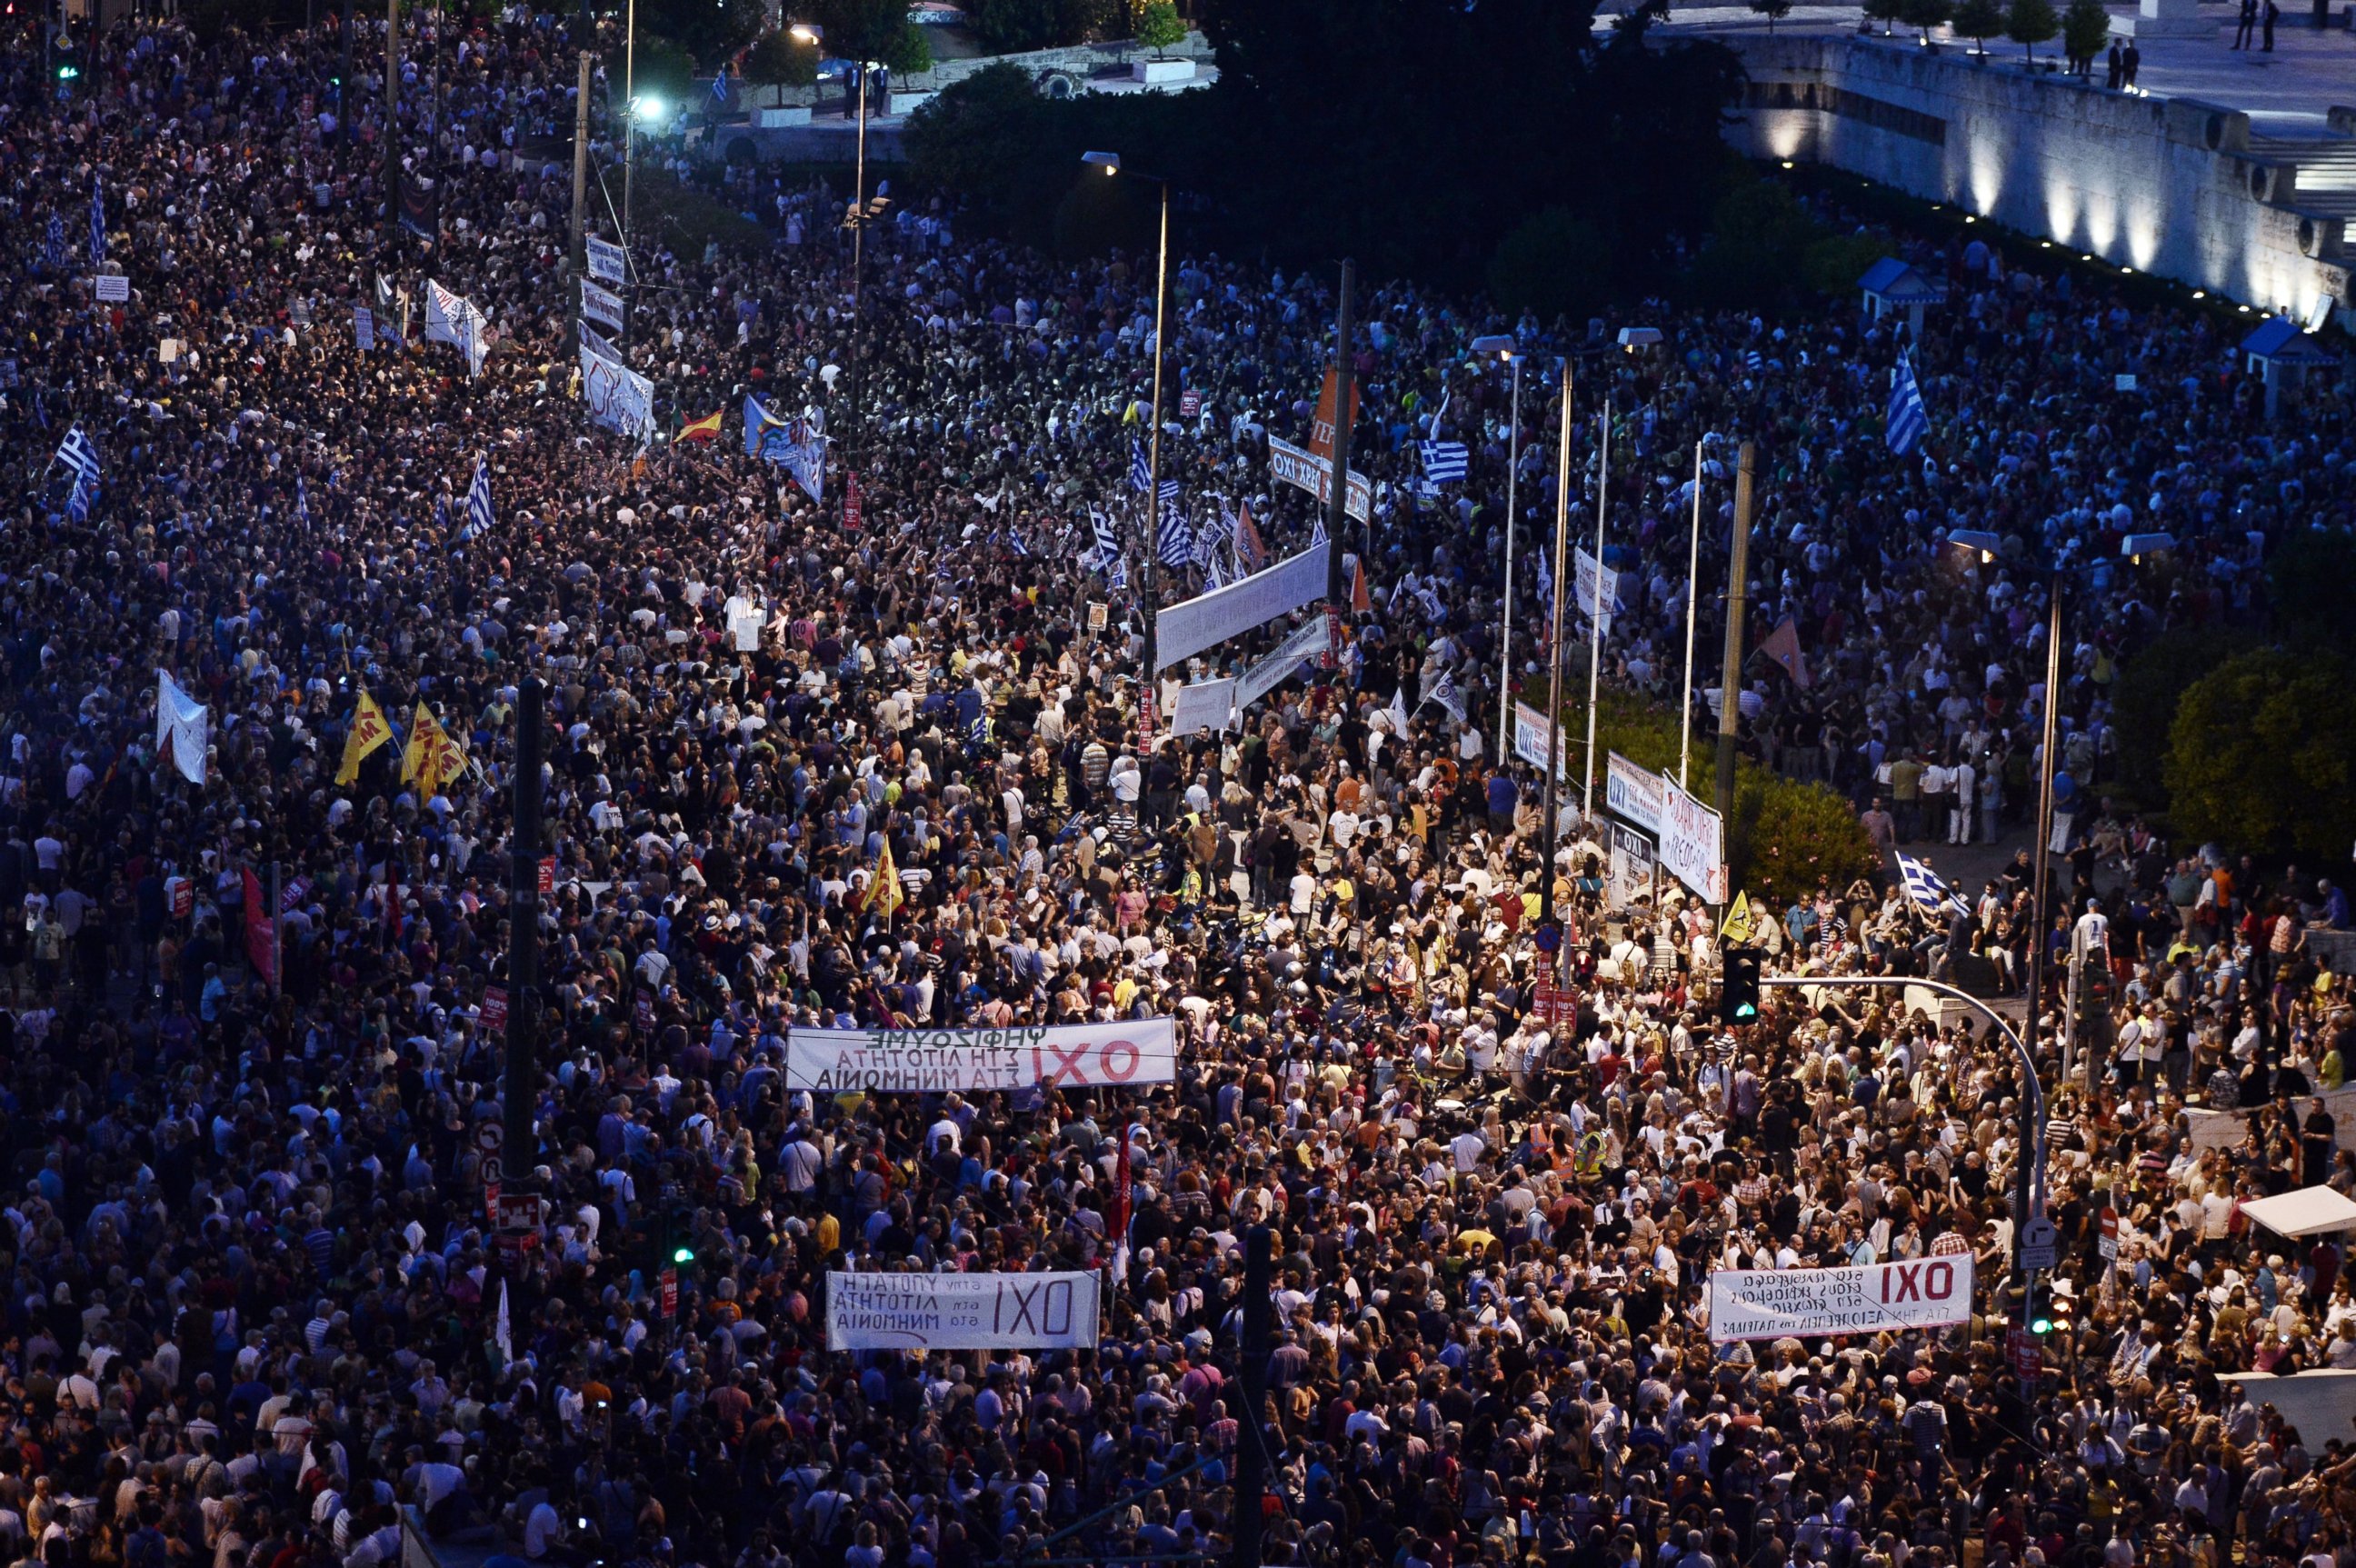 PHOTO: Carrying banners calling for a "NO" vote in the forthcoming referendum on bailout conditions set by the country's creditors, protesters gather in front of the Greek parliament in Athens on June 29, 2015.  